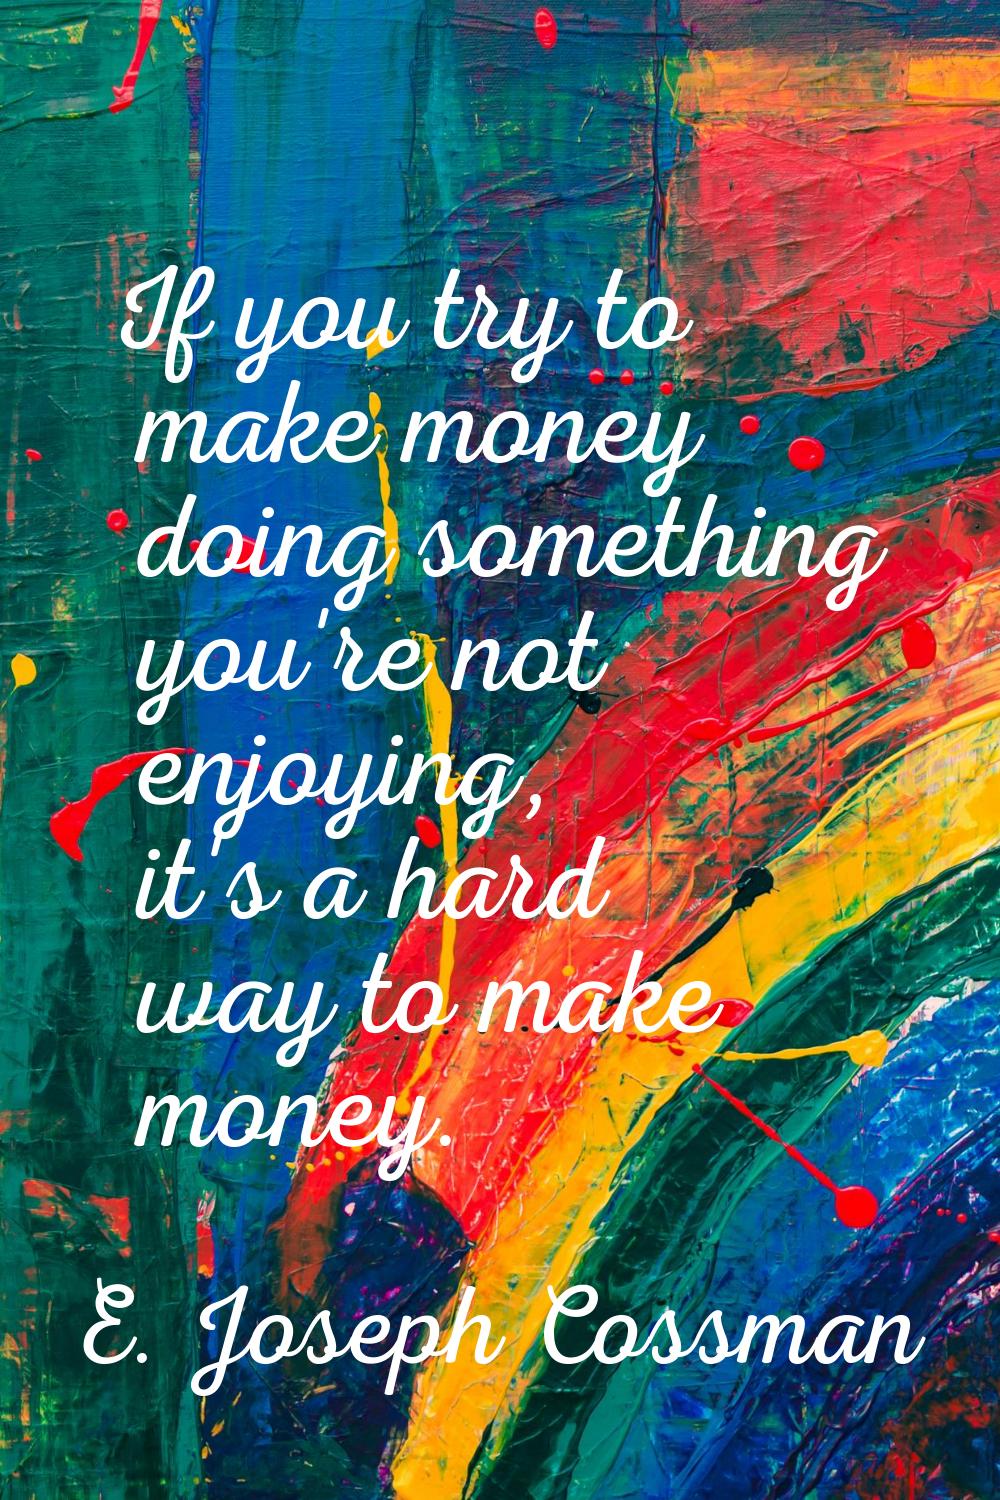 If you try to make money doing something you're not enjoying, it's a hard way to make money.